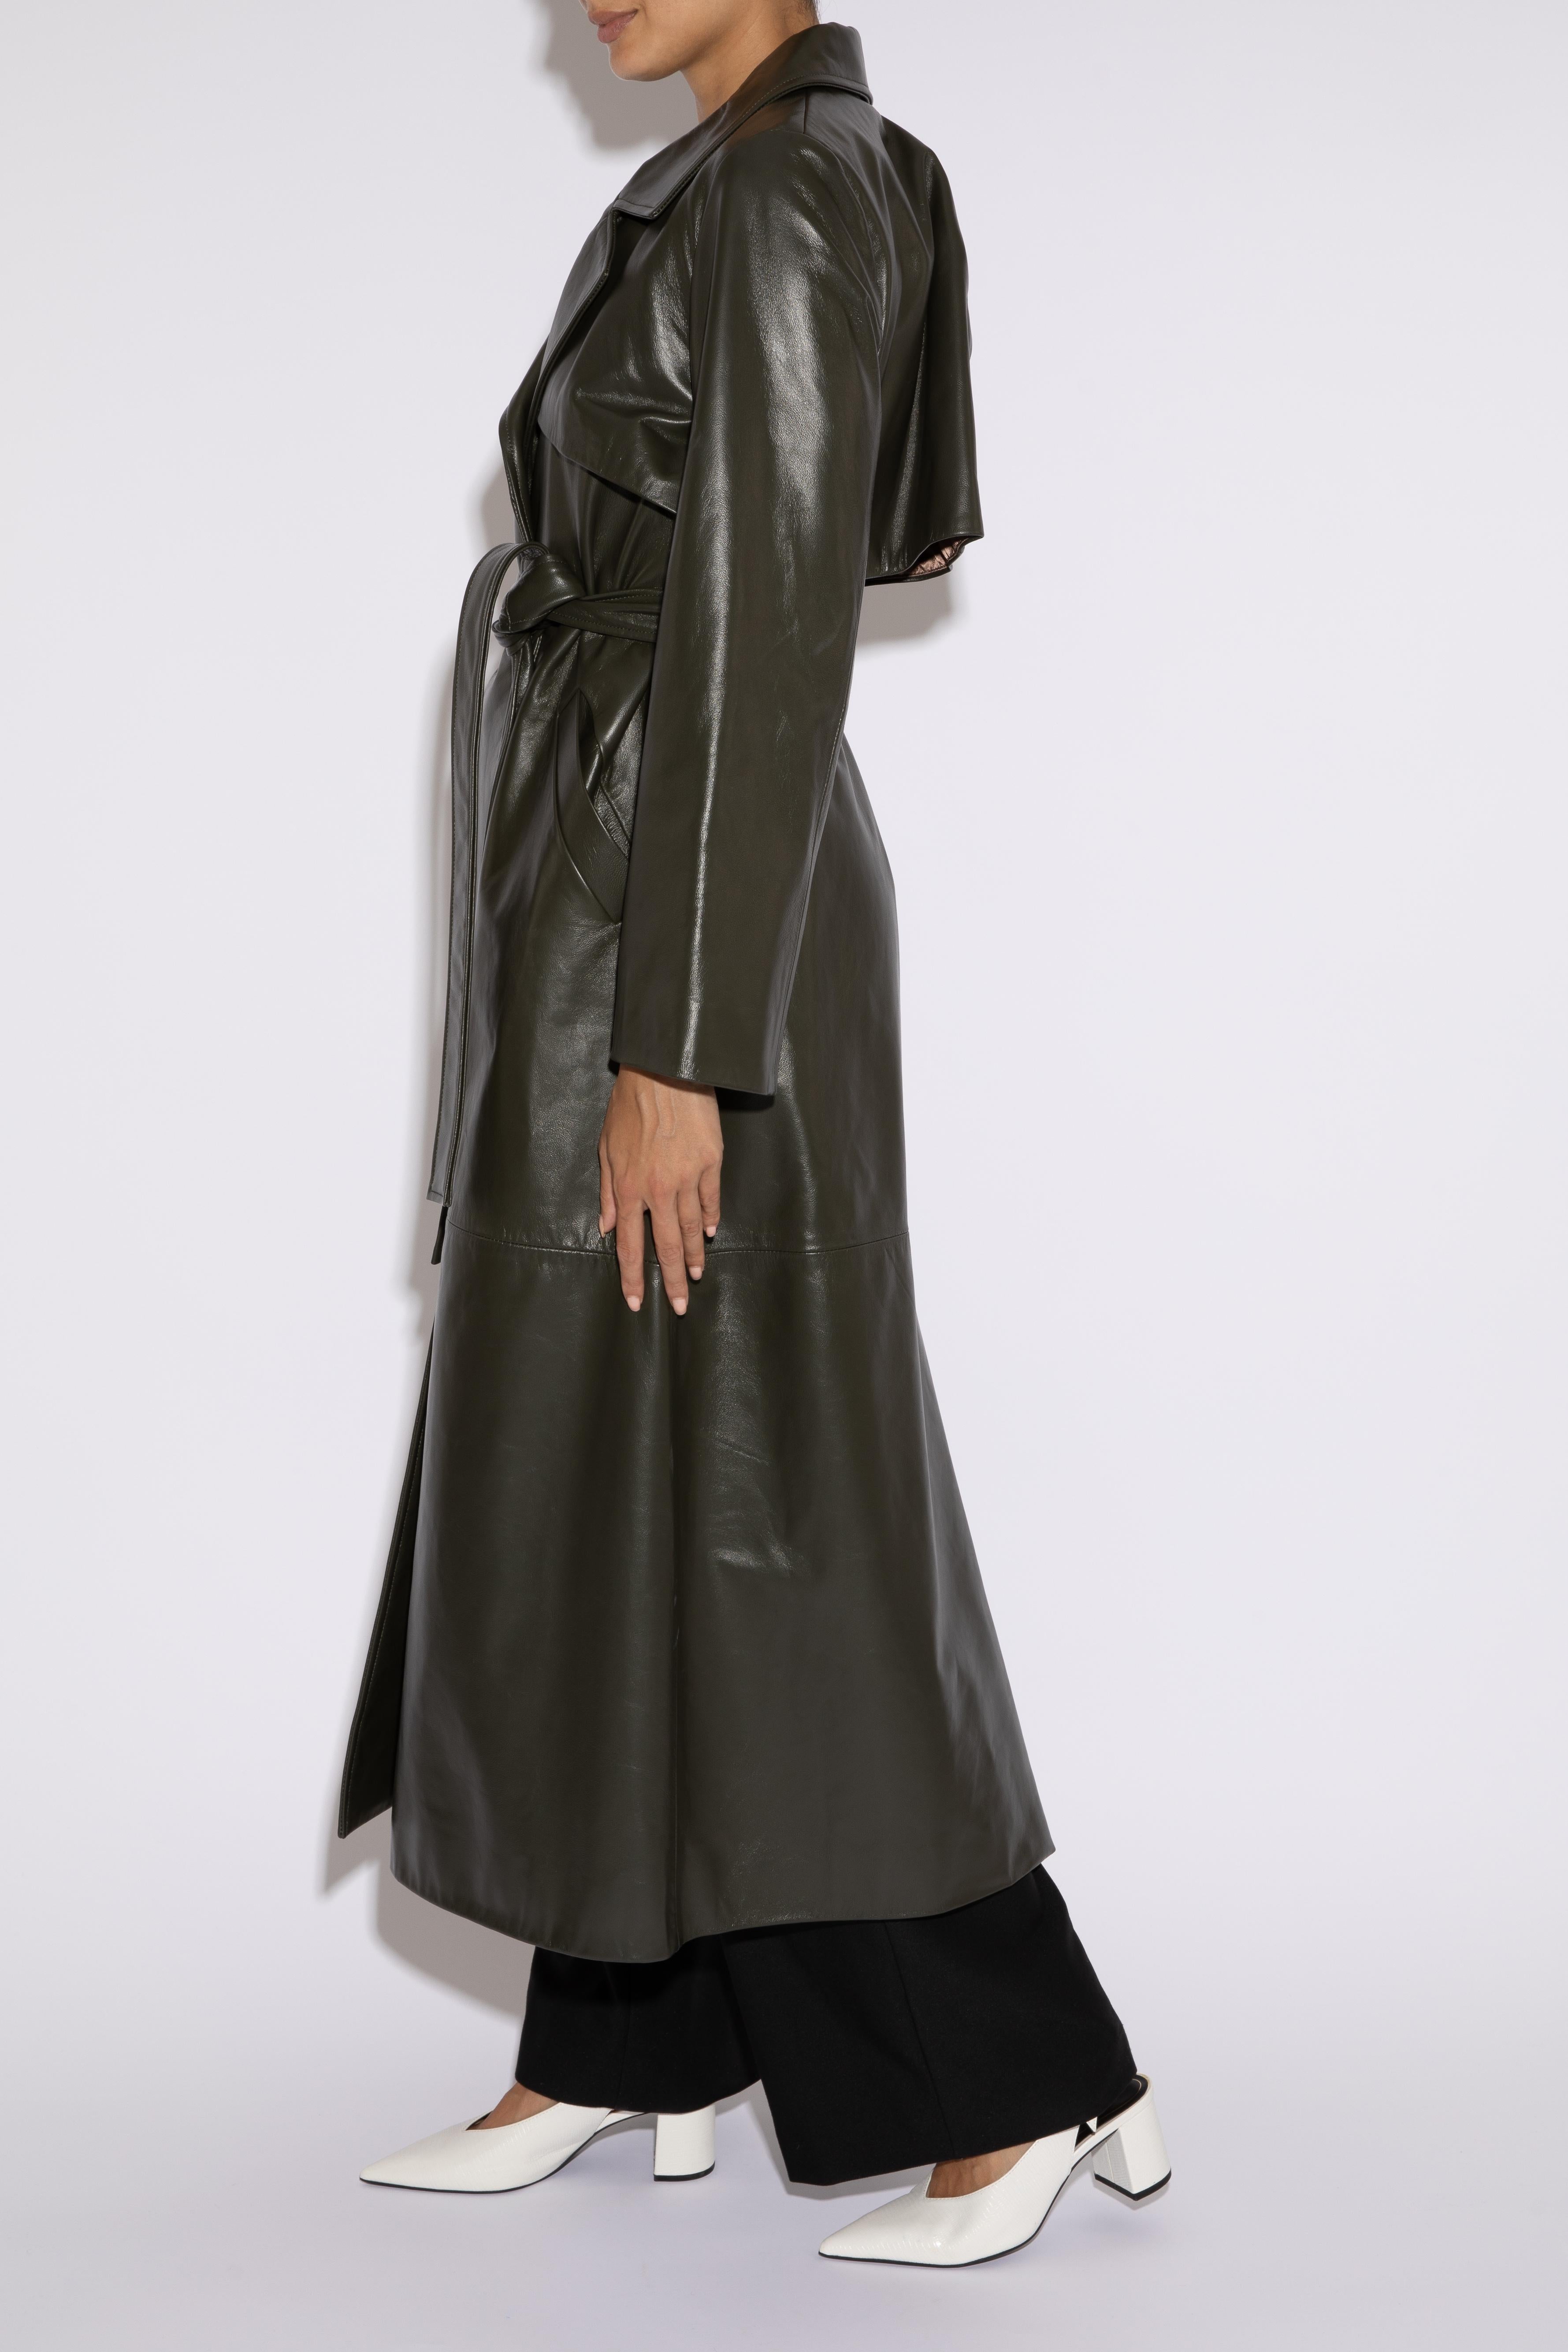 Verheyen London Leather Trench Coat in Dark Khaki Green - Size uk 14

Handmade in London, made with 100% Italian Lambs Leather this luxury item is an investment piece to wear for a lifetime.  This piece is made by artisans in London, expert artisans